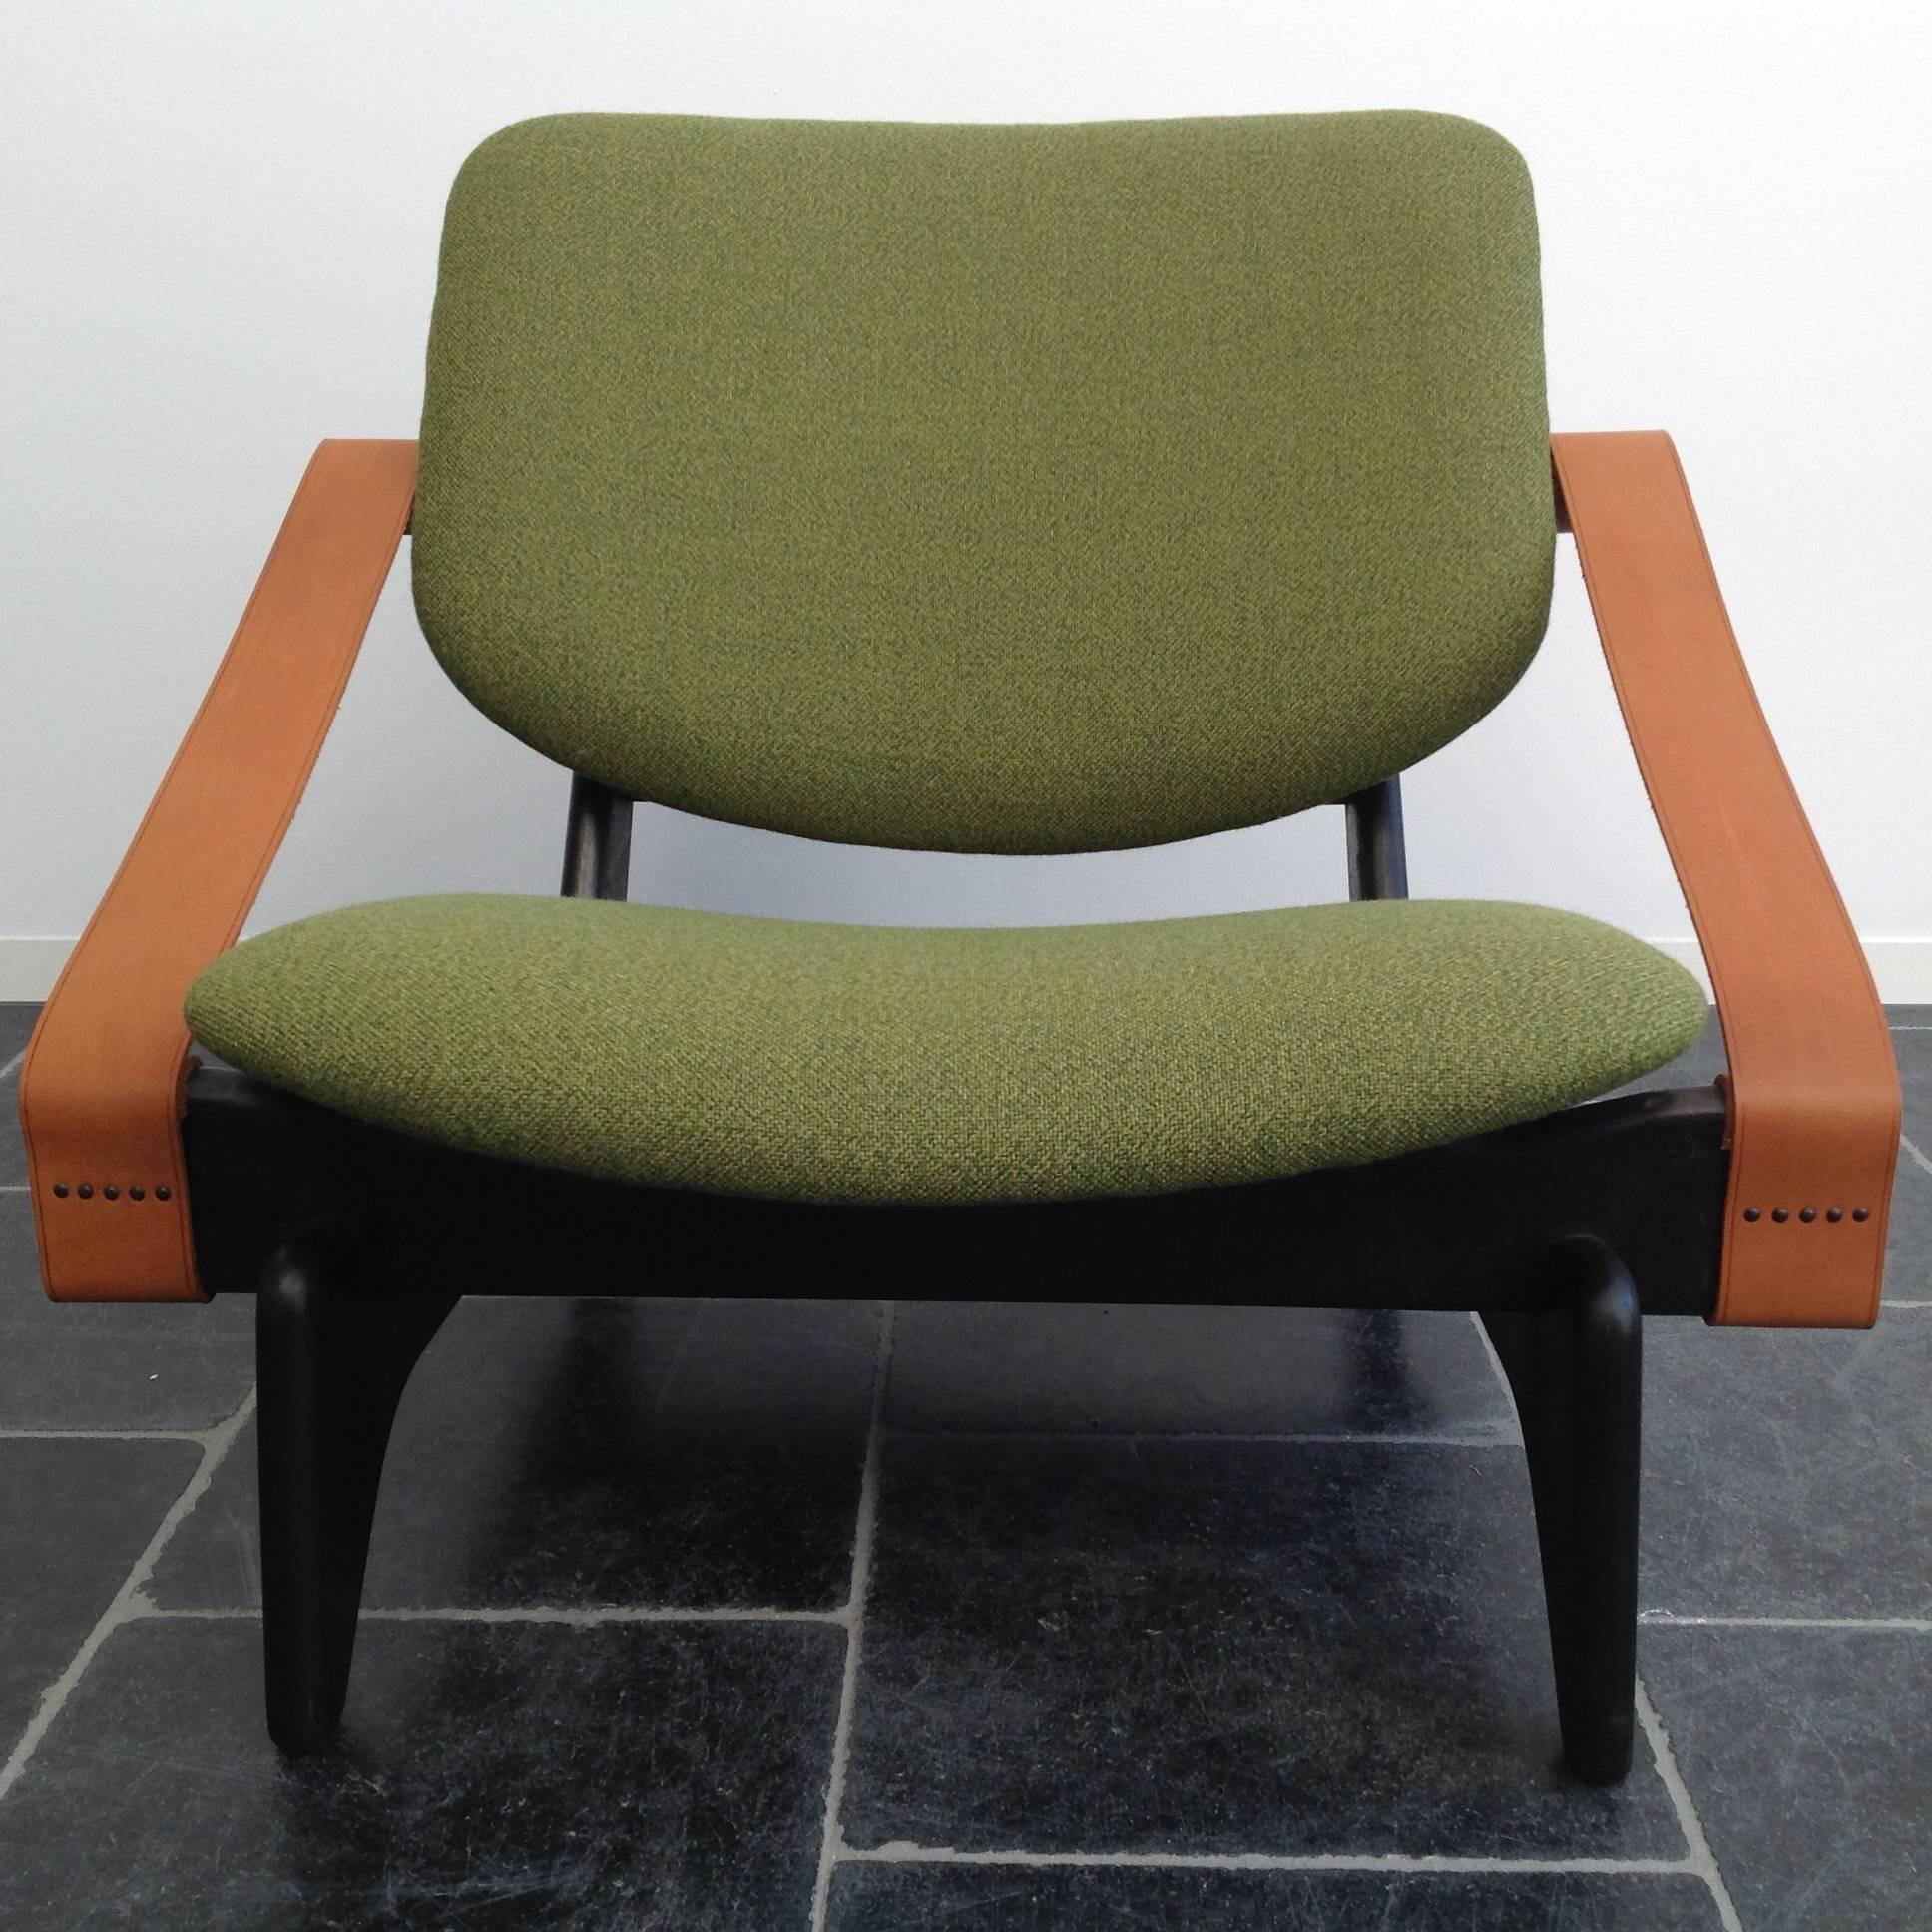 Has enjoyed a complete restoration.
The leather armrest are replaced, original but broken are still present.
The upholstery and foam has also been renewed, this in a beautiful bright green moss color fabric.
It's a dream if you see this chair,